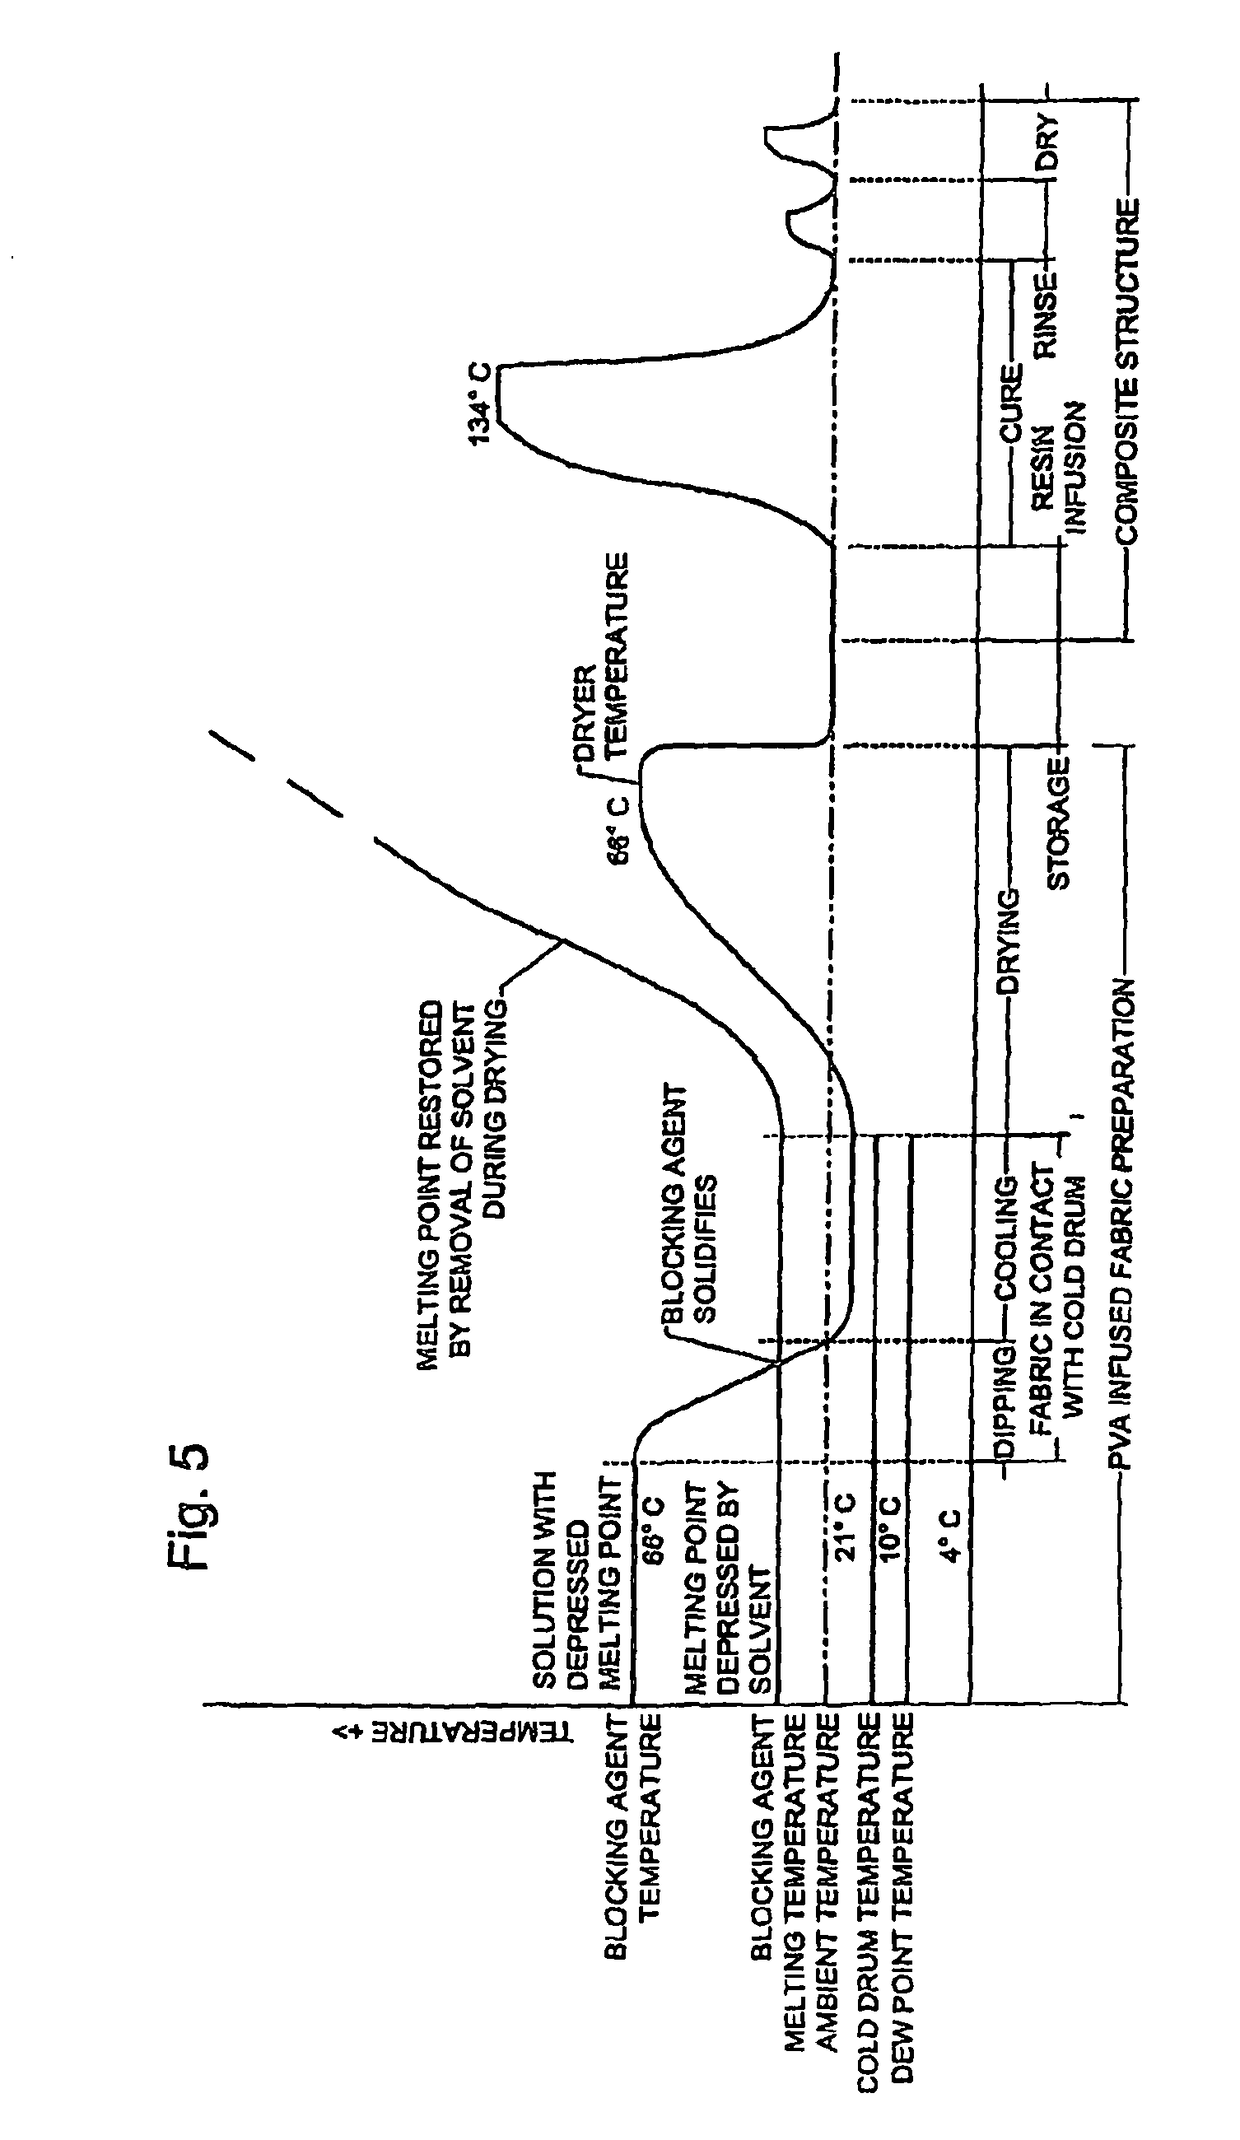 Process of manufacturing fiber reinforced composite via selective infusion of resin and resin blocking substance